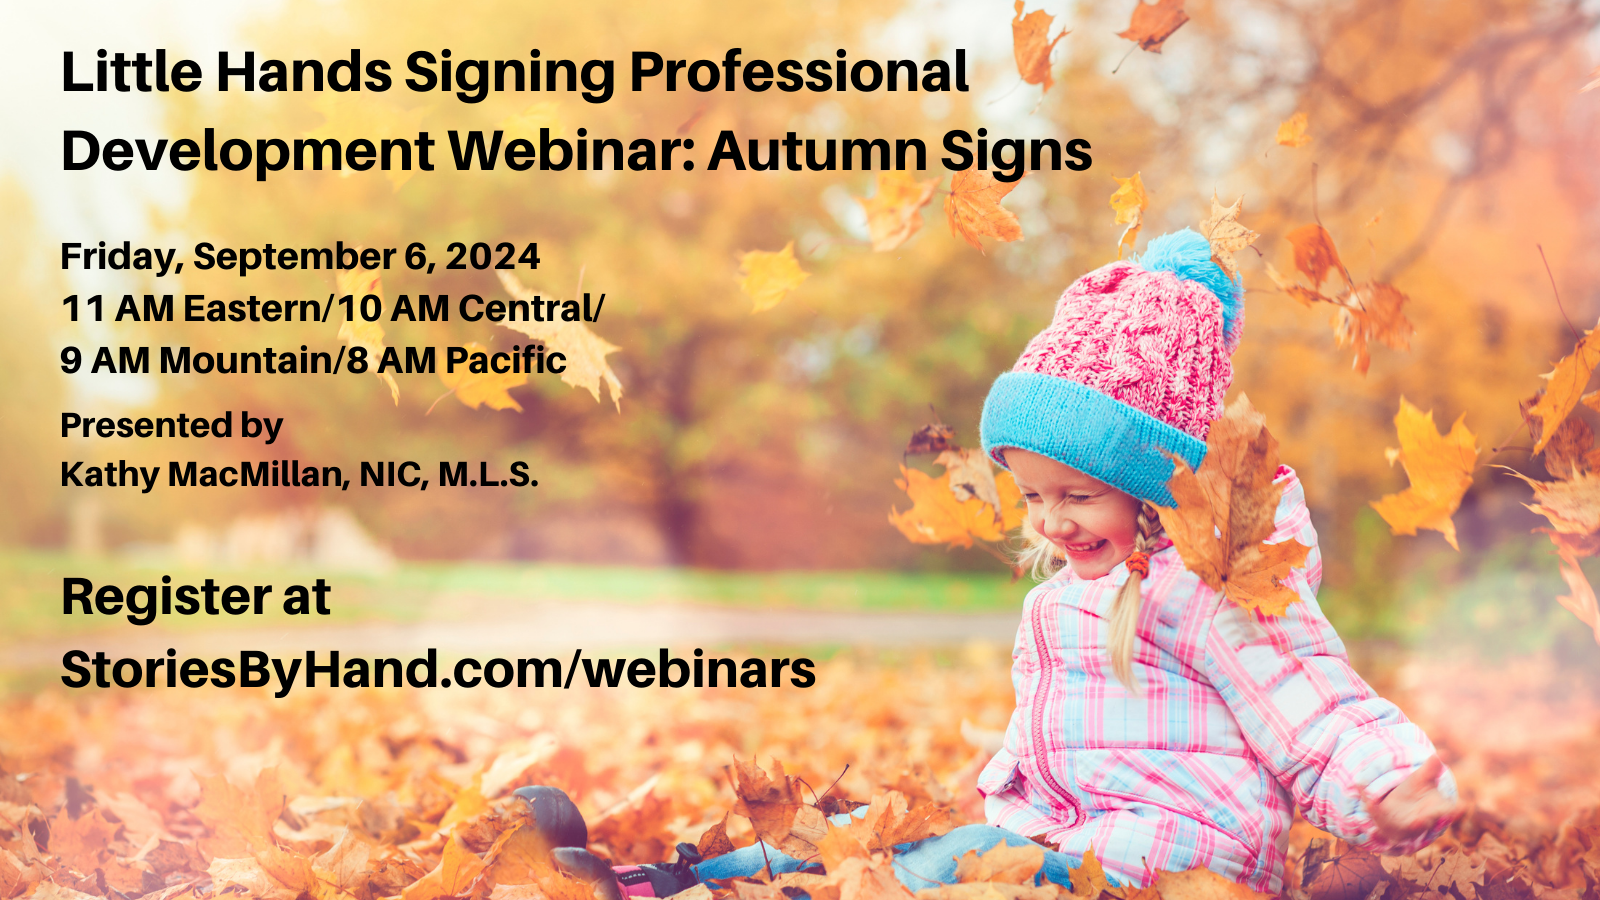 A child sits in a pile of autumn leaves. Little Hands Signing Professional Development Webinar: Autumn Signs. Friday, September 6, 2024. 11 AM Eastern/10 AM Central/9 AM Mountain/8 AM Pacific. Presented by Kathy MacMillan, NIC, MLS. Register at StoriesByHand.com/webinars